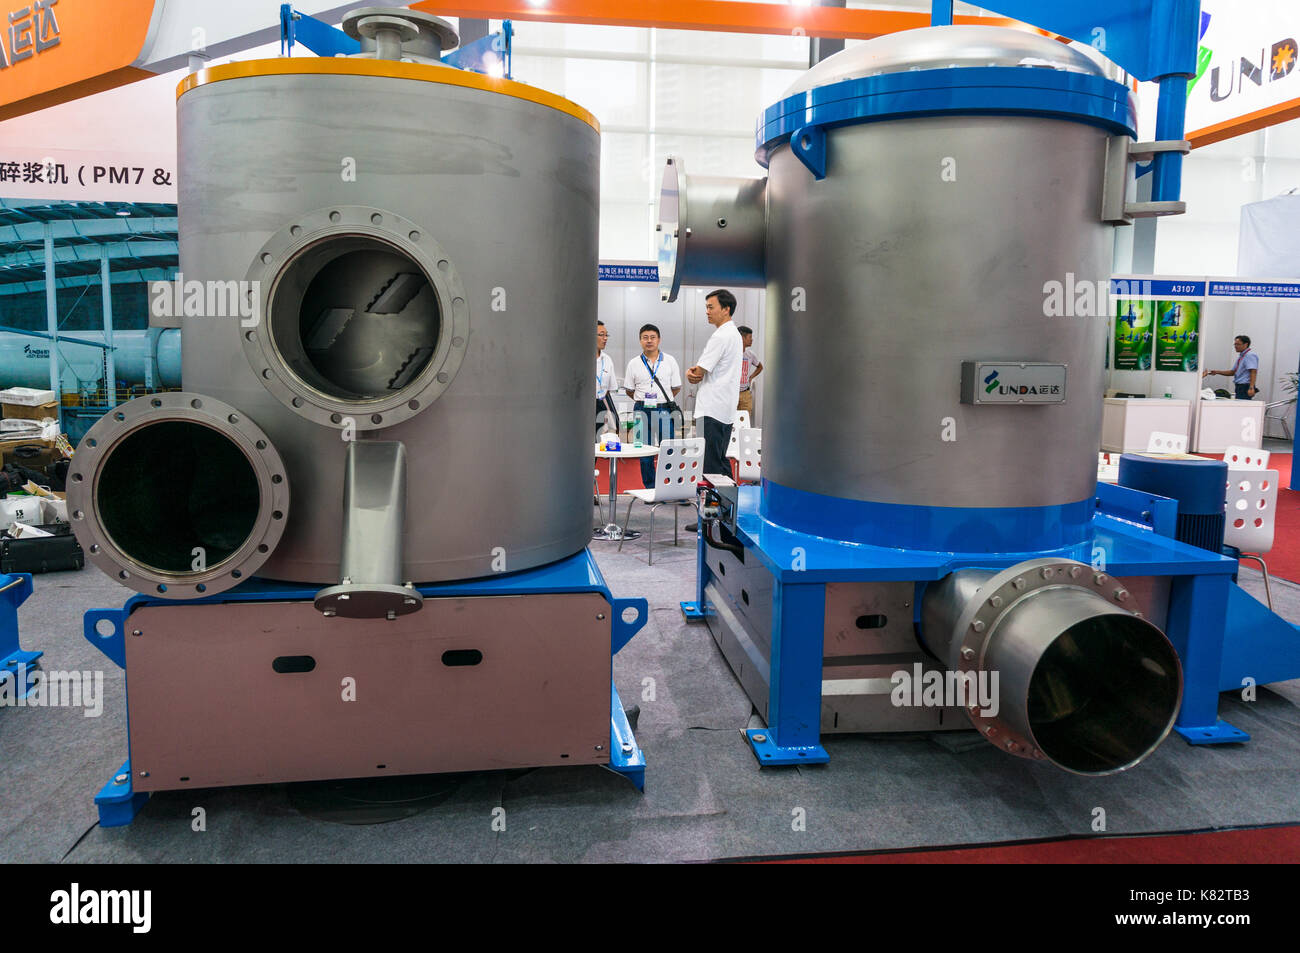 Industrial paper pulp machines on display at paper industry exhibition in Shenzhen, Guangdong, China Stock Photo